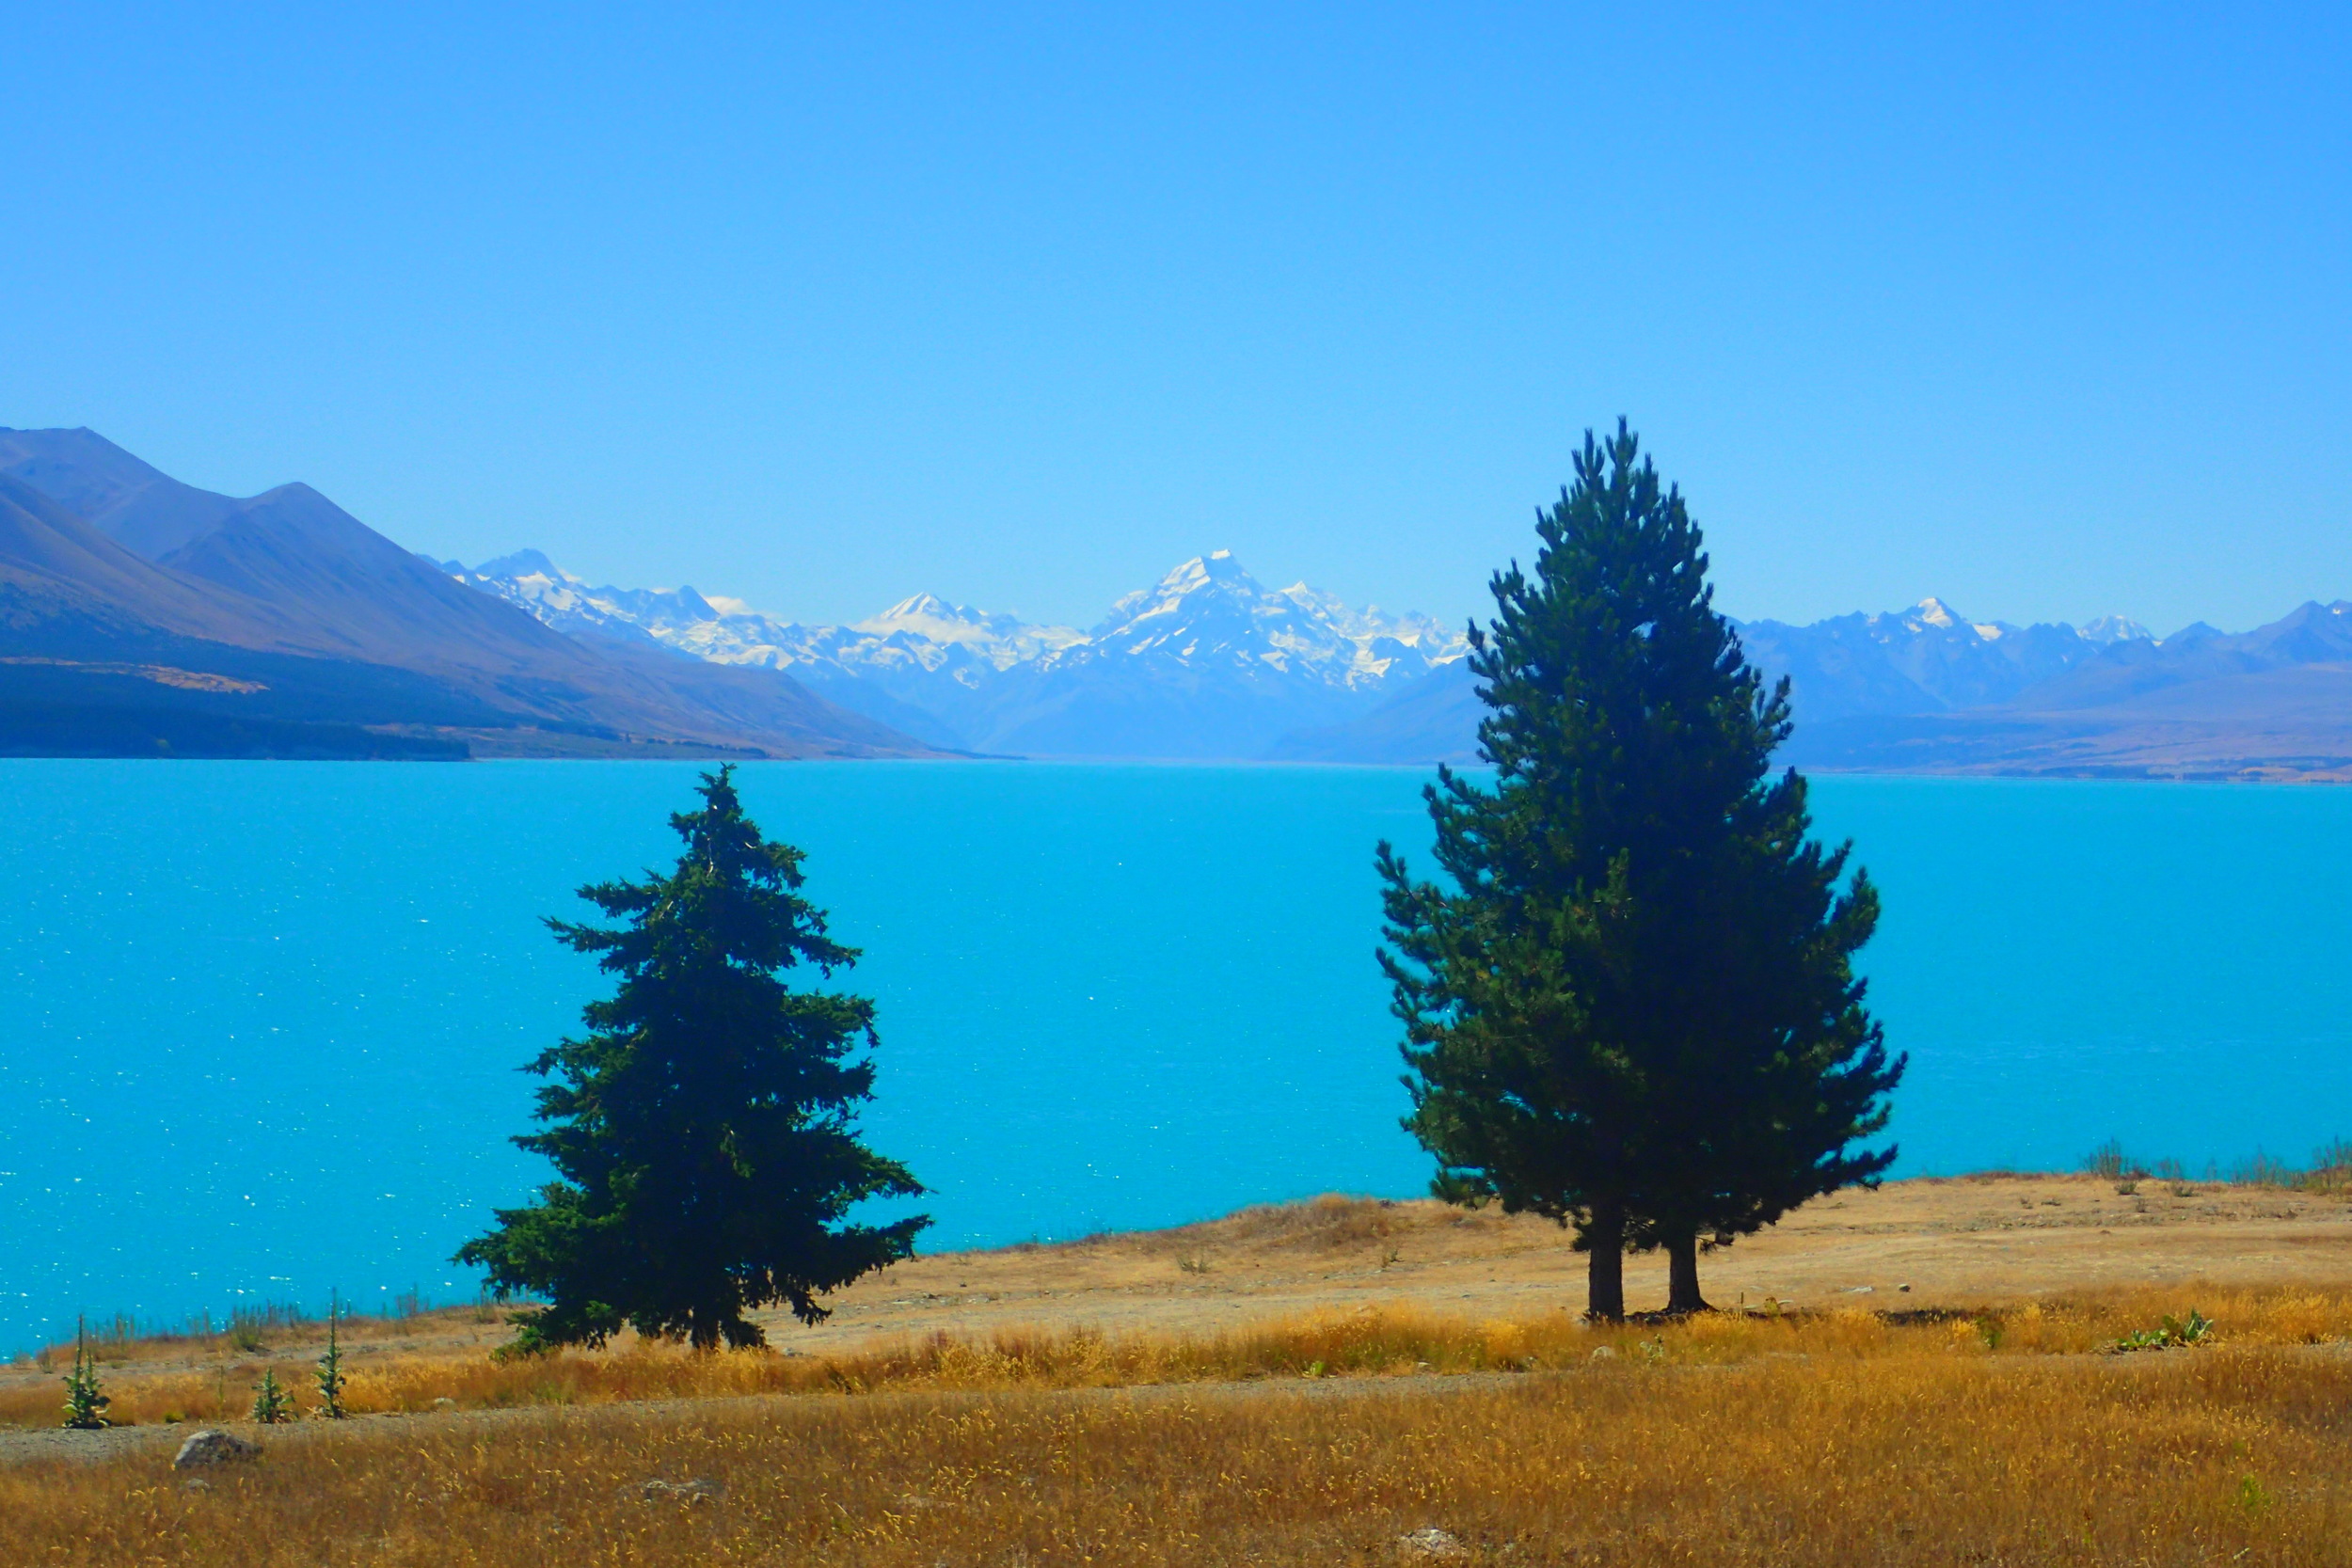 Lake Pukaki To Tekapo The World S Best Star Gazing And My Favorite Place On The South Island Deviating The Norm